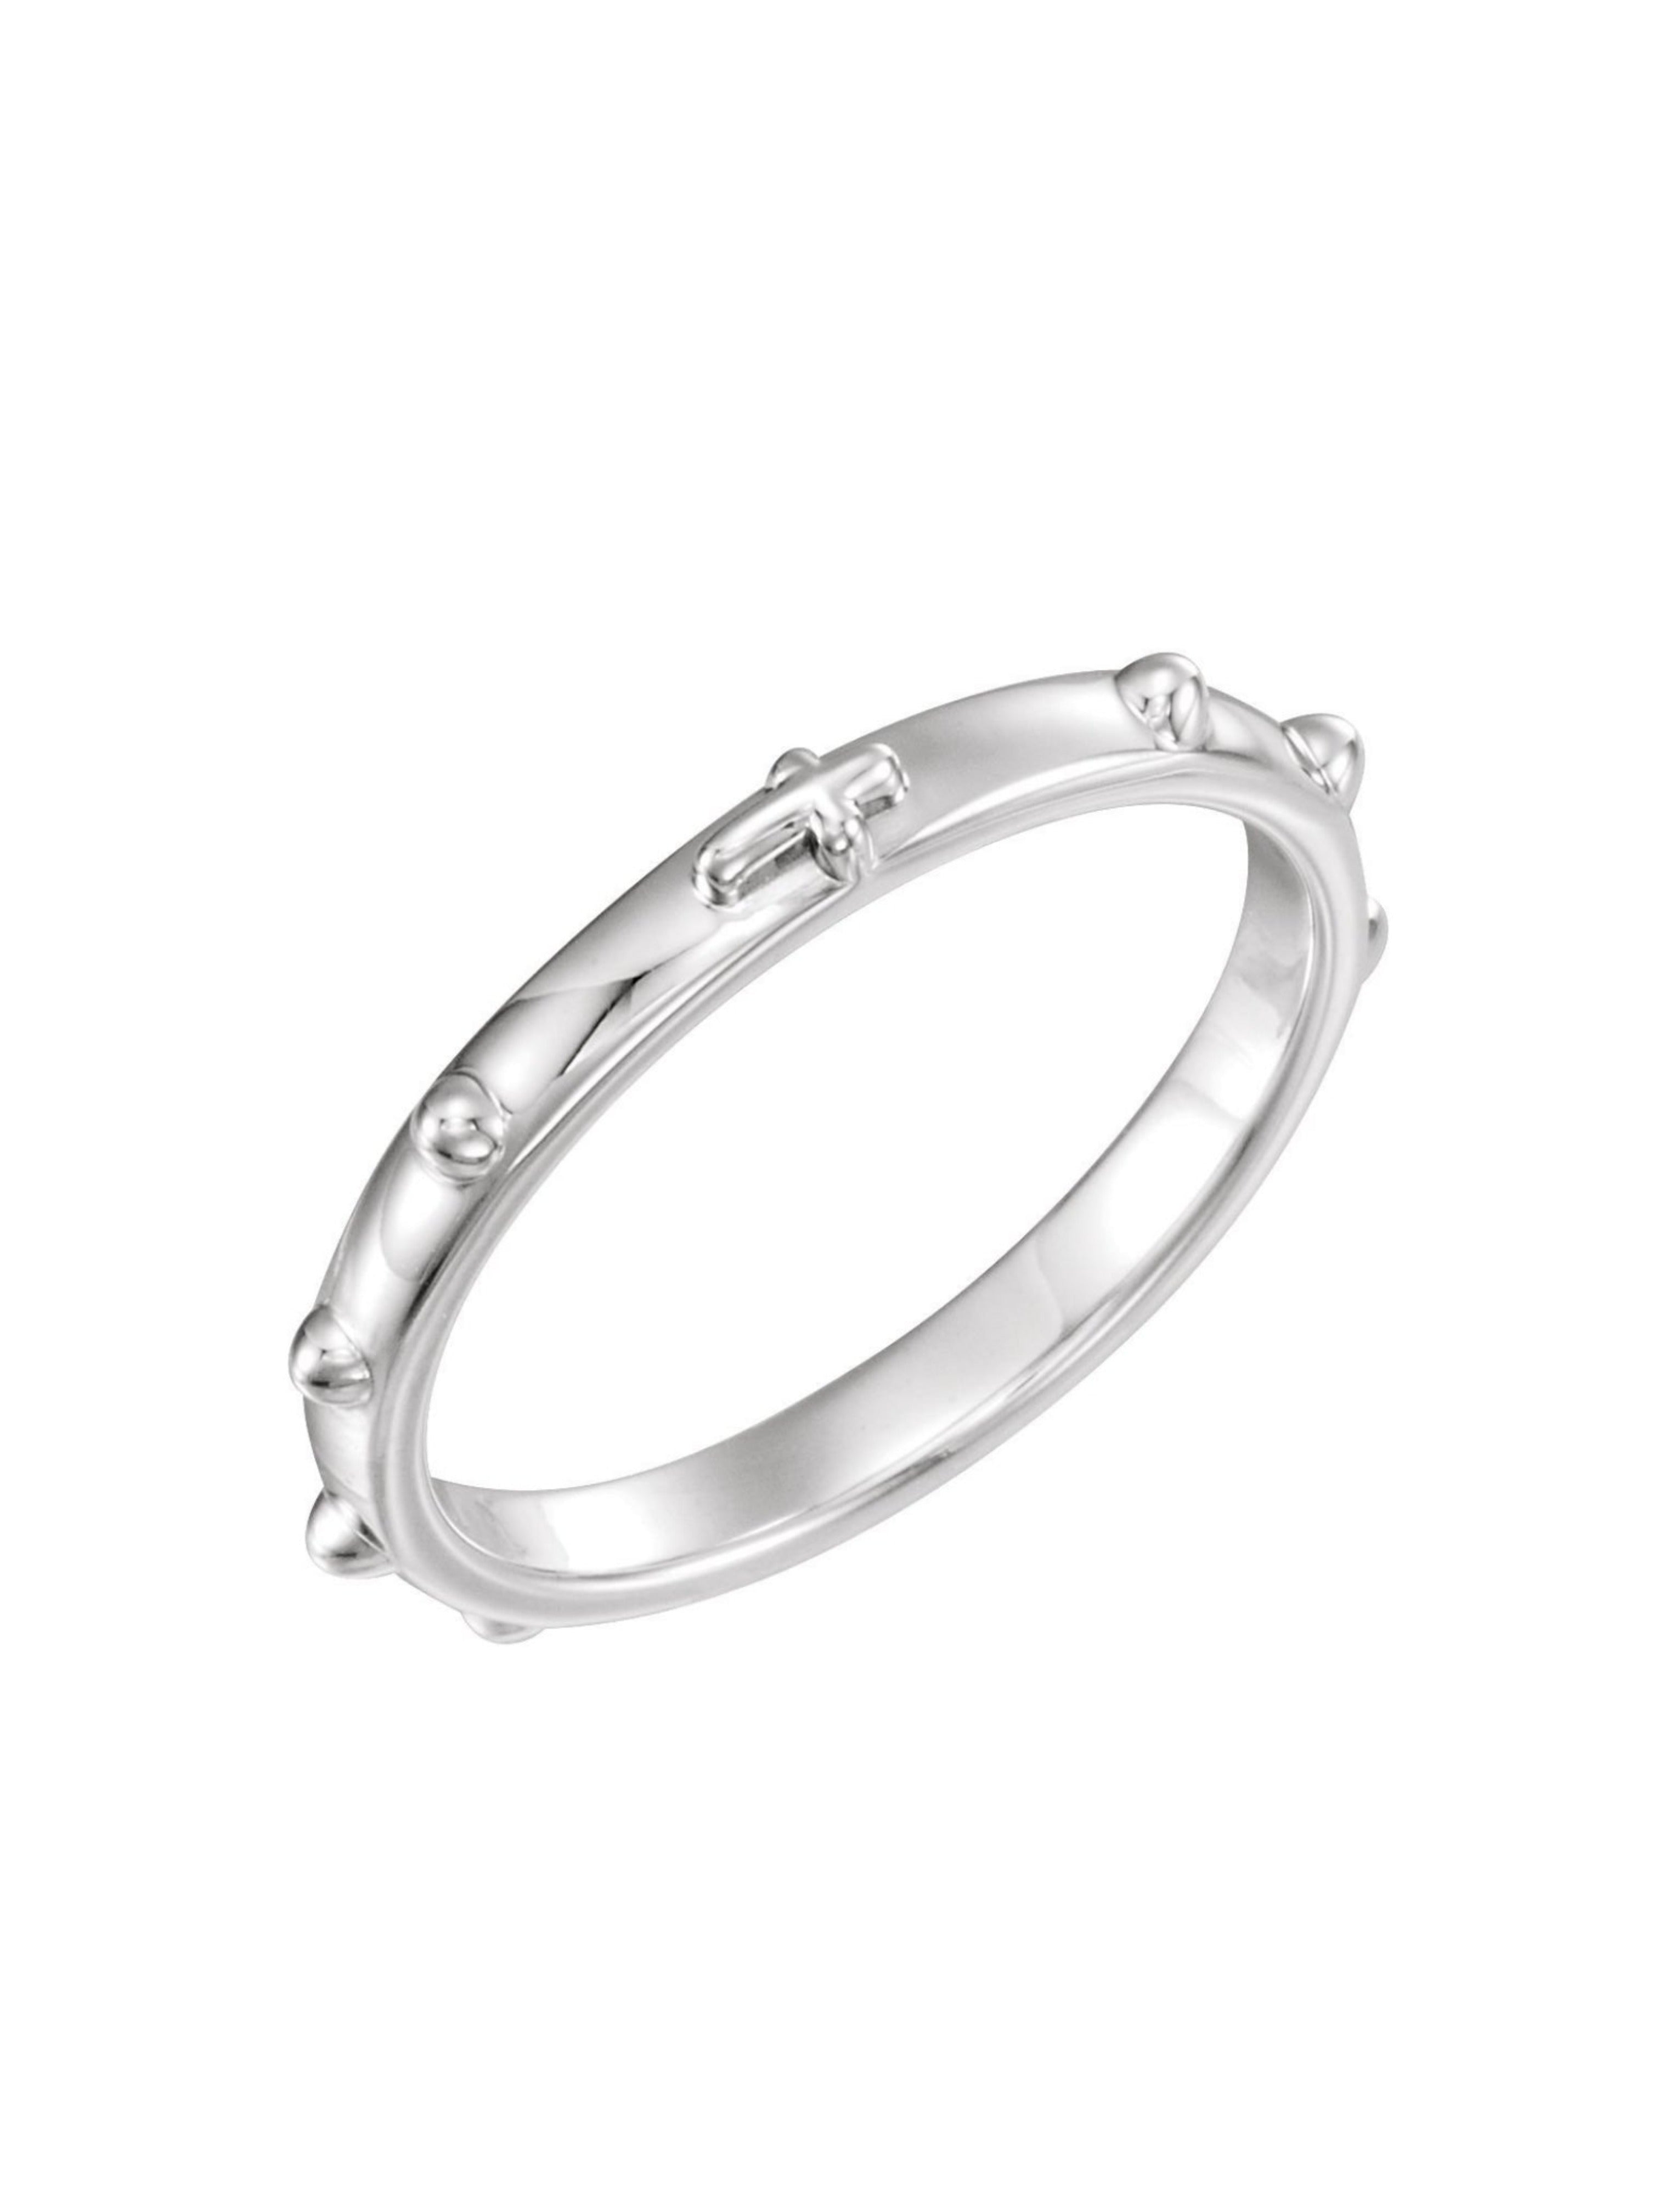 Bonyak Jewelry Sterling Silver Rosary Ring - Size 7, Metal: Buy Online at  Best Price in UAE - Amazon.ae